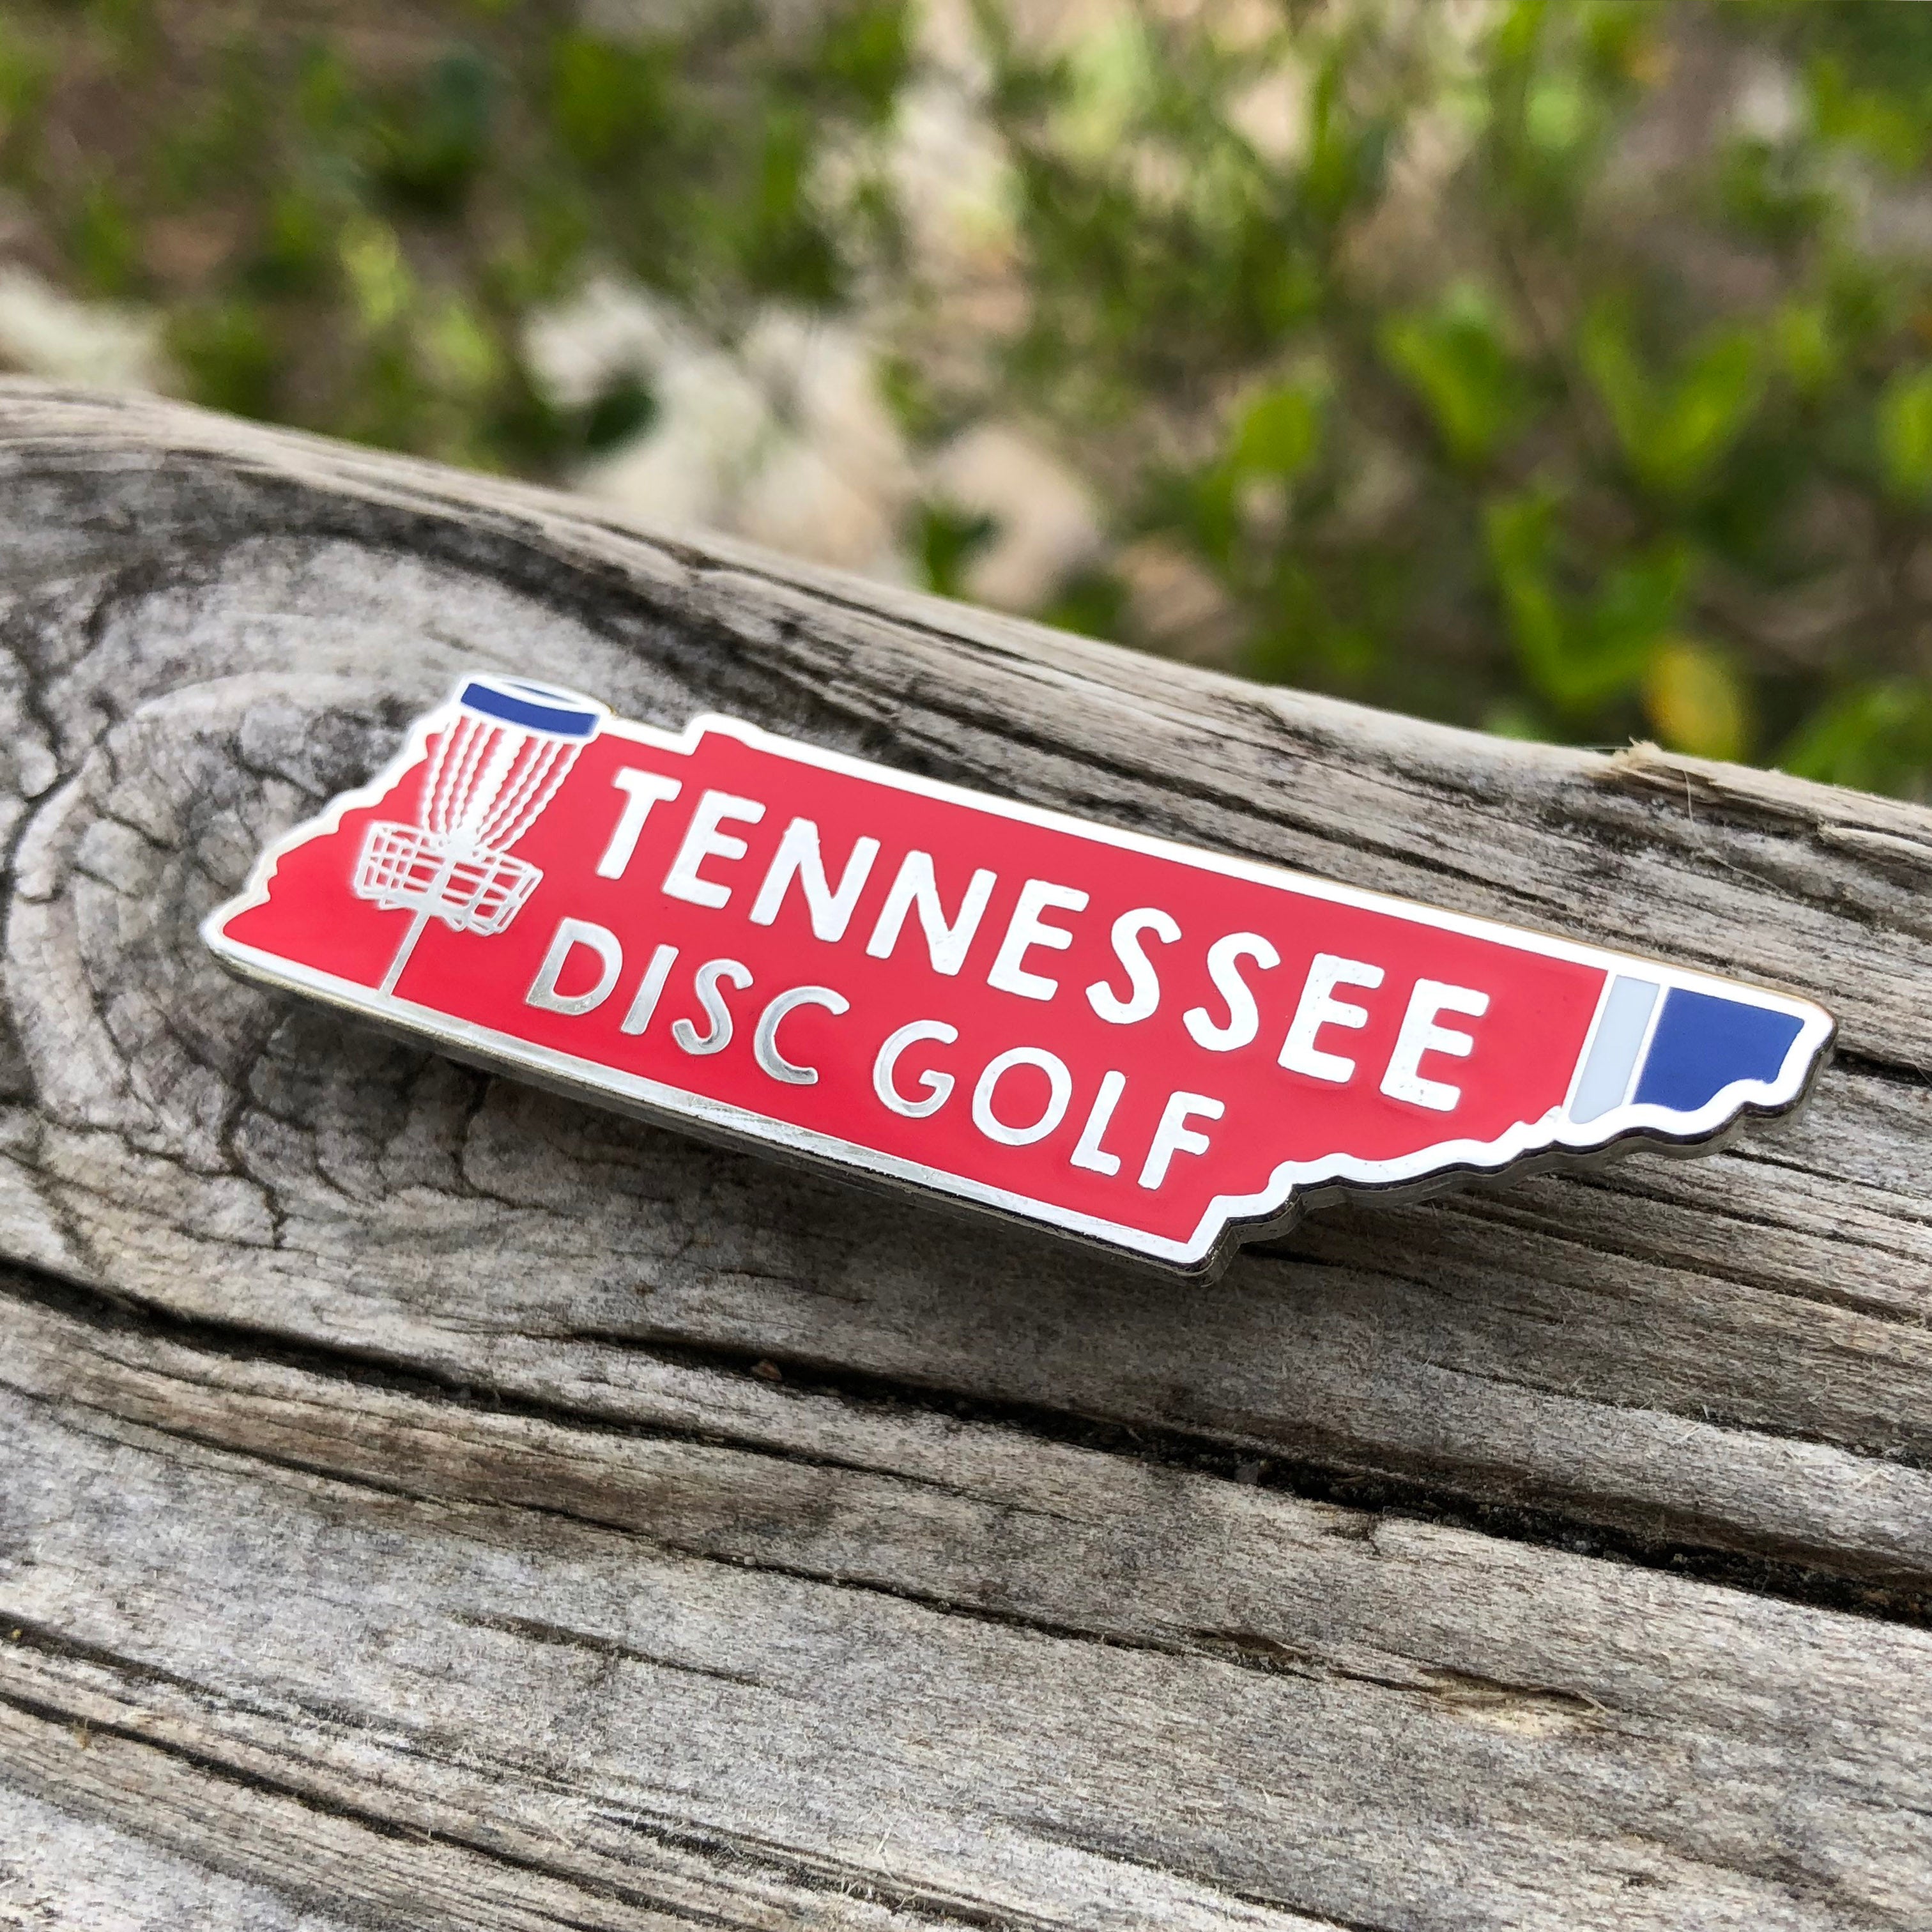 Tennessee Disc Golf Pin